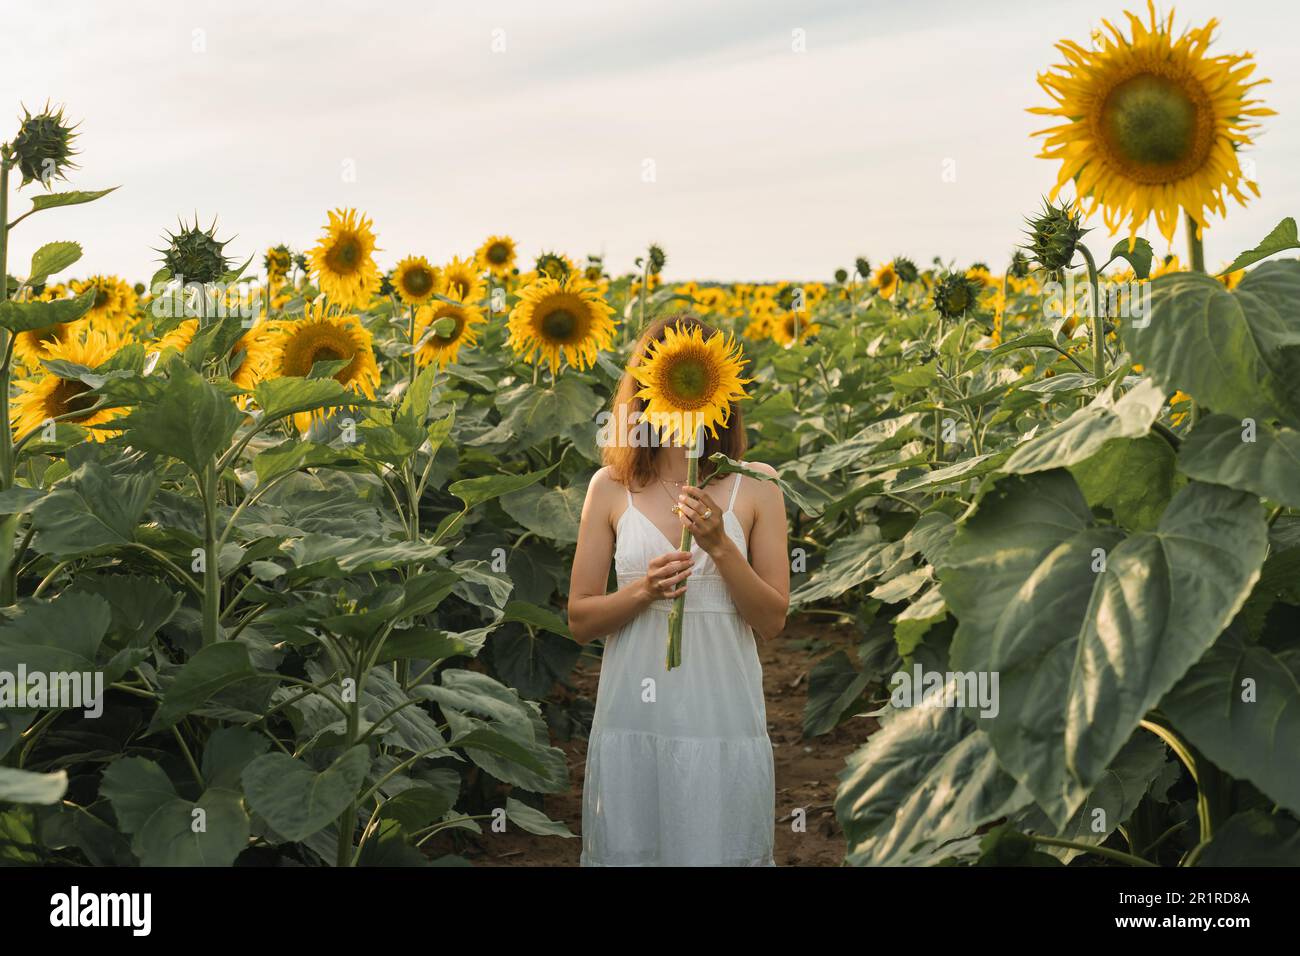 Woman standing in a sunflower field in summer holding a flower in front of her face, Belarus Stock Photo